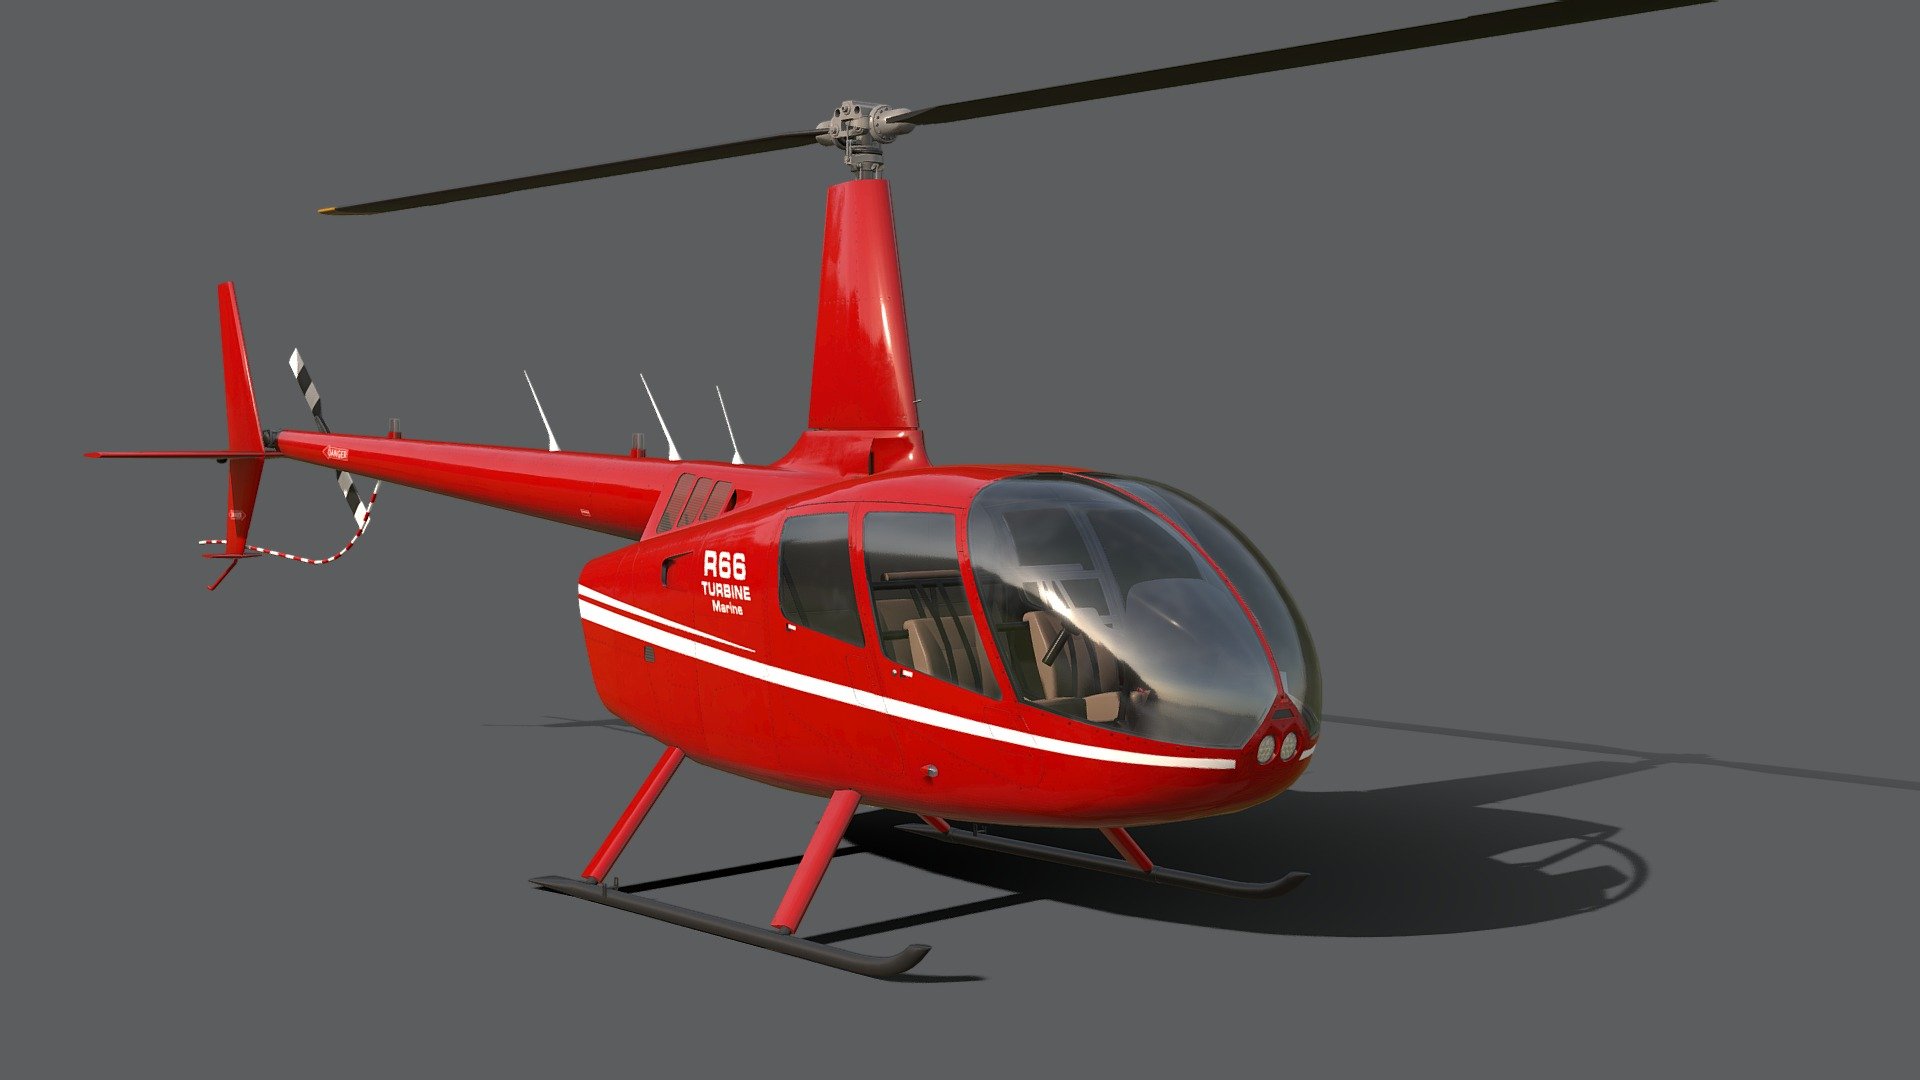 The Robinson R66 is a helicopter designed and built by Robinson Helicopter Company. It has five seats, a separate cargo compartment and is powered by a Rolls-Royce RR300 turboshaft engine. The R66 is slightly faster and smoother than the Robinson R44 from which it is derived. The R66 received both type and production certificates from the U.S. Federal Aviation Administration (FAA) on October 25, 2010 3d model